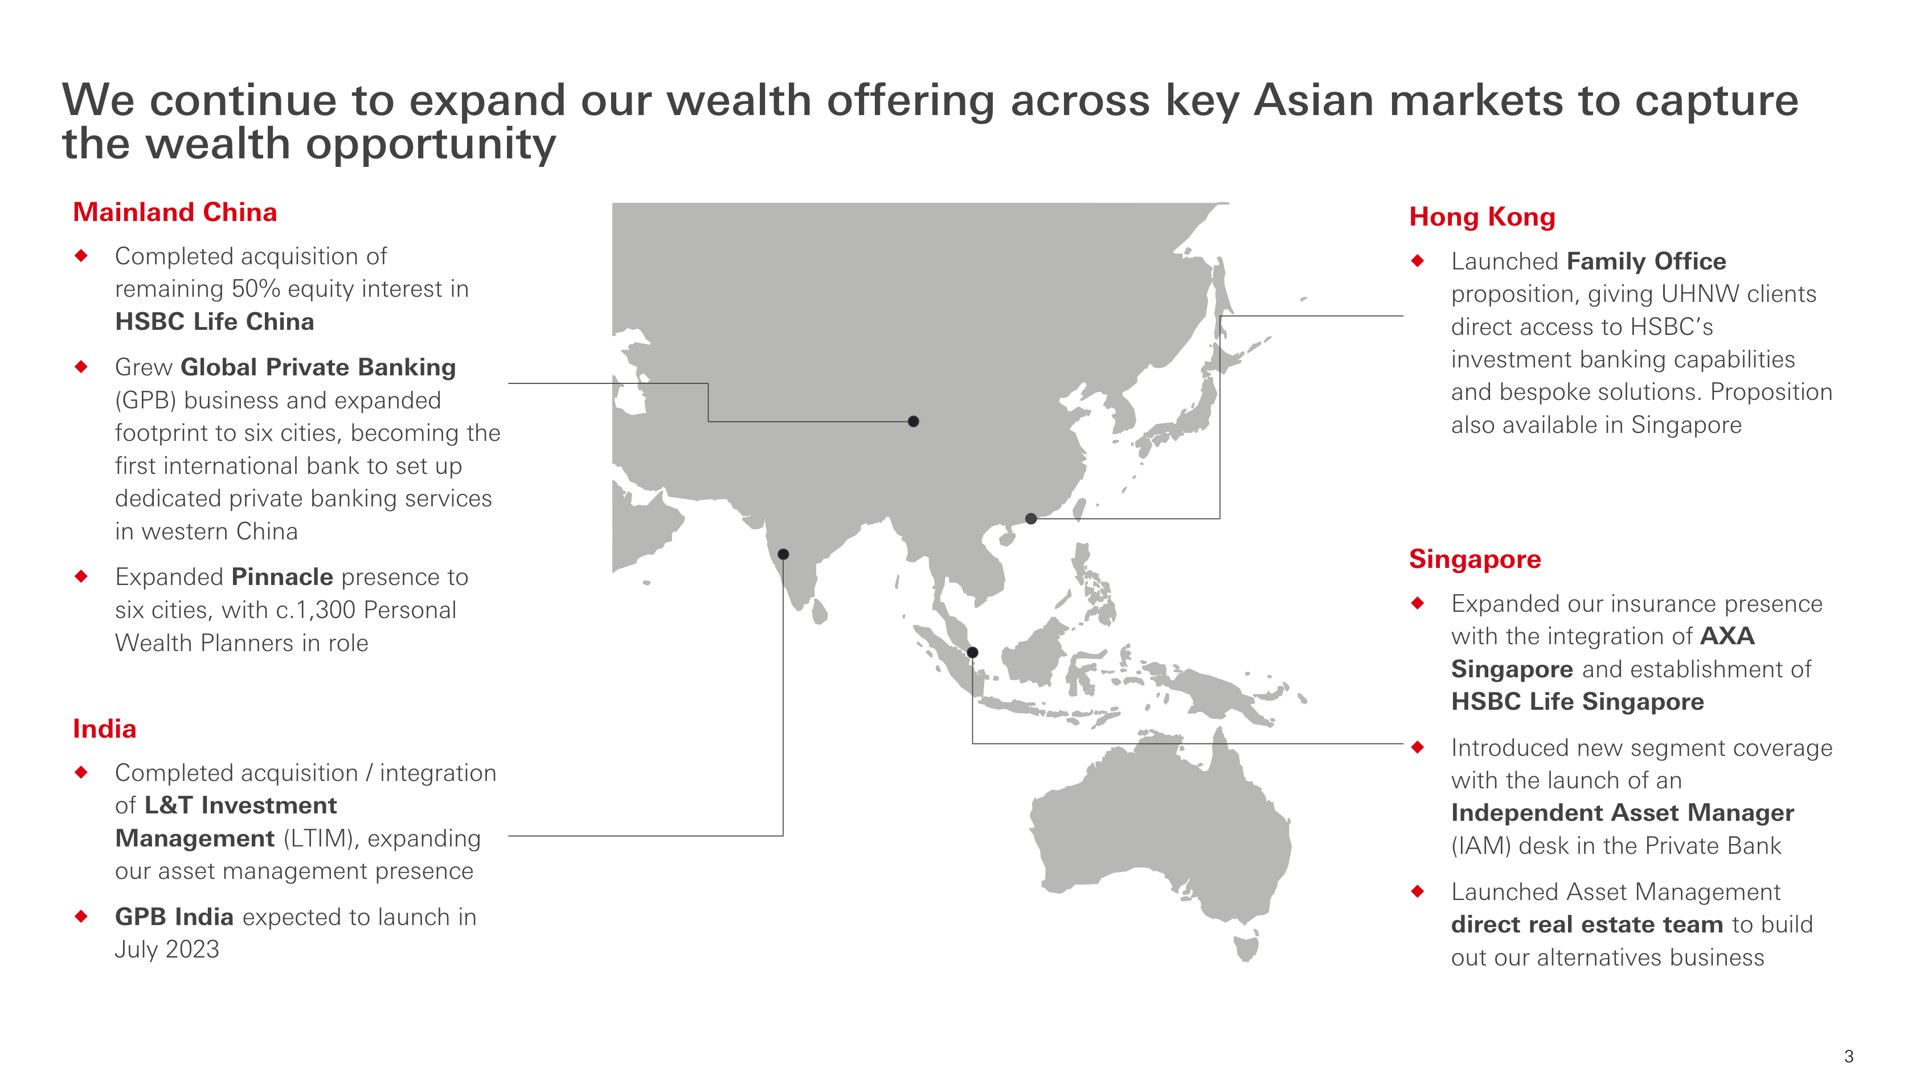 we continue to expand our wealth offering across key markets to capture the wealth opportunity | HSBC